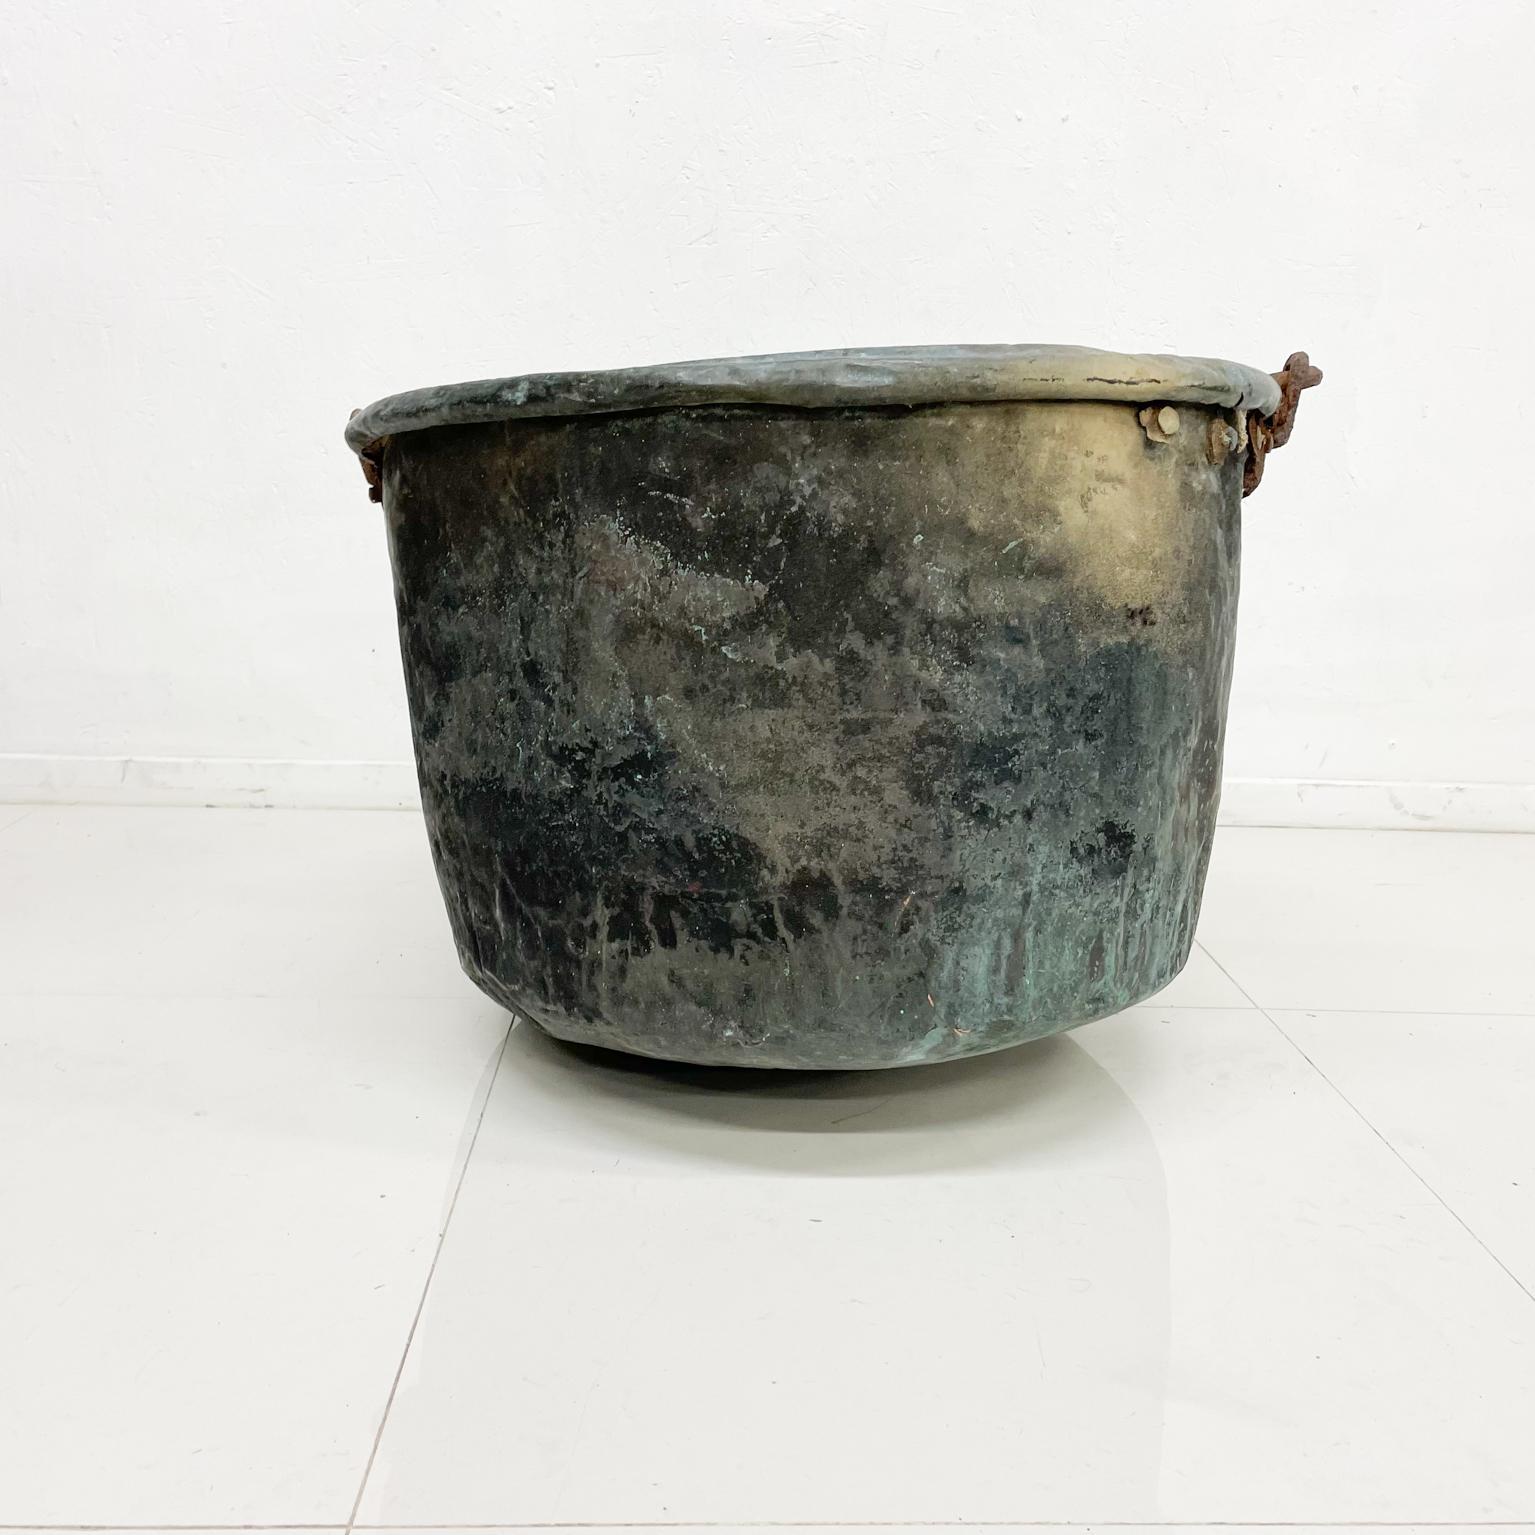 Circa 1900s Old Copper Bucket Tub with forged iron handle.
Perforated detailing.
Patinated fair condition.
Bends, dings + fabulous charm.
26 diameter 19.5 height, 30.5 height with handles
Unrestored Vintage Antique presentation and condition.
Refer